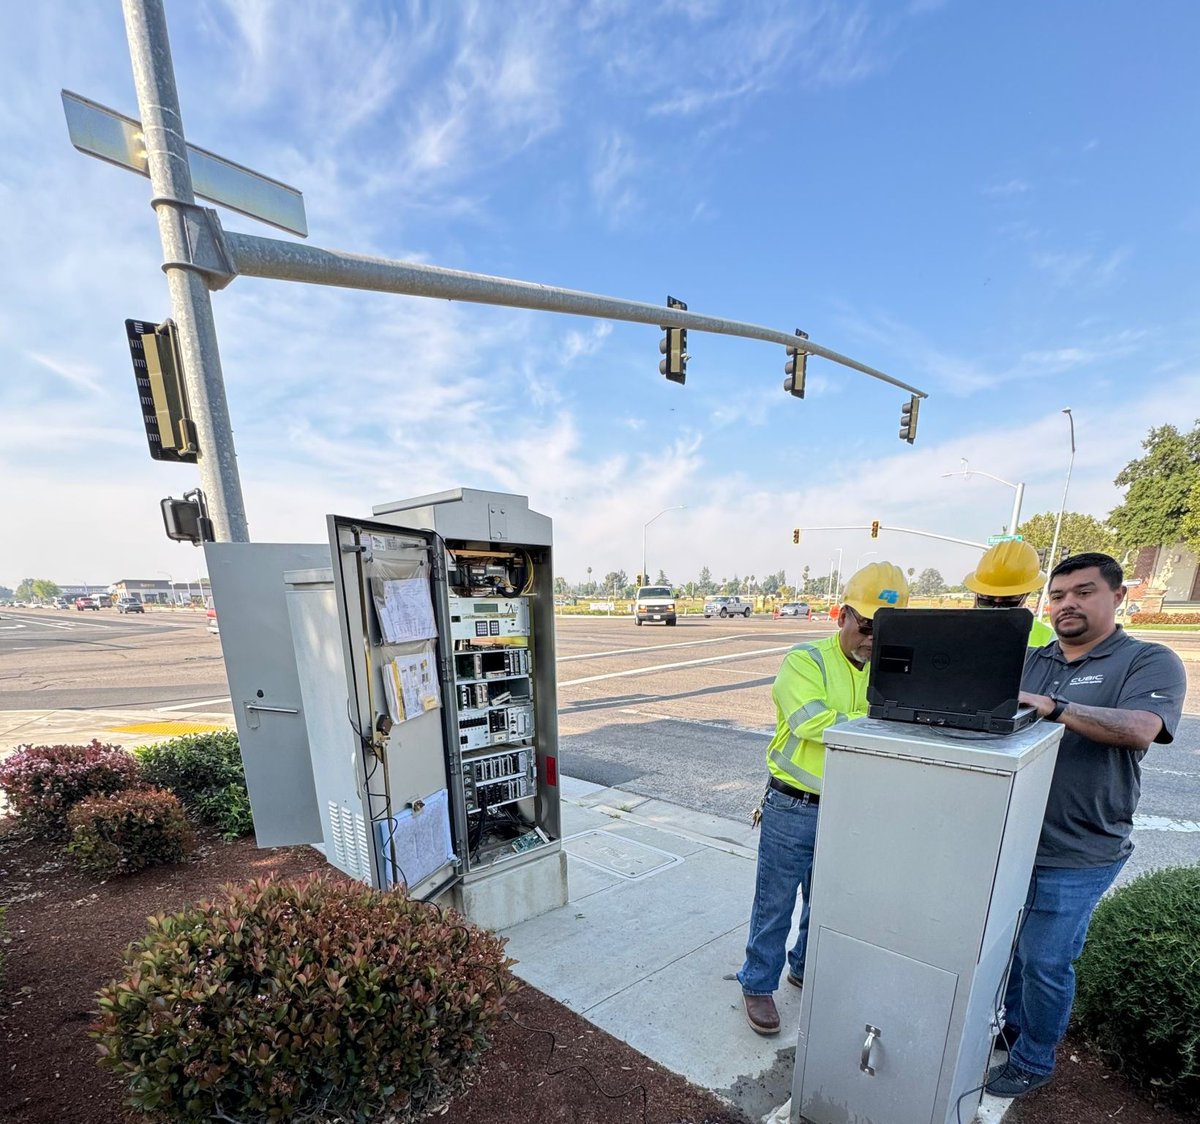 #BTS on #Gridsmart video detection in-field training with the California Department of Transportation 🚦😊 #TrafficCamera #IntersectionSafety #RoadSafety #CentralValley #California #IntelligentTransportationSystems